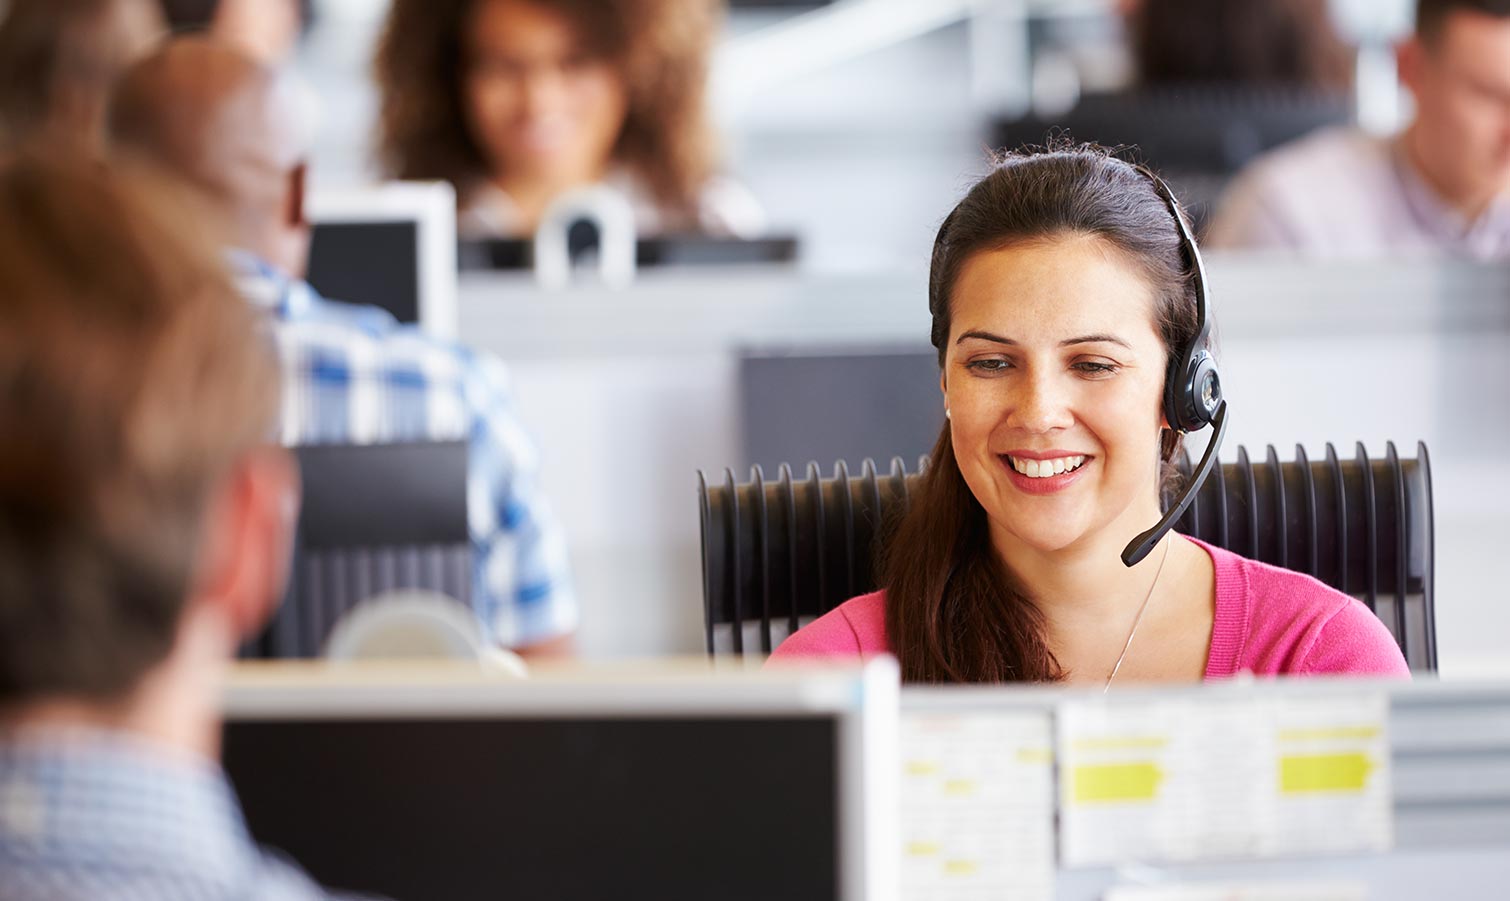 Customer Support Agent on a call wearing a headset